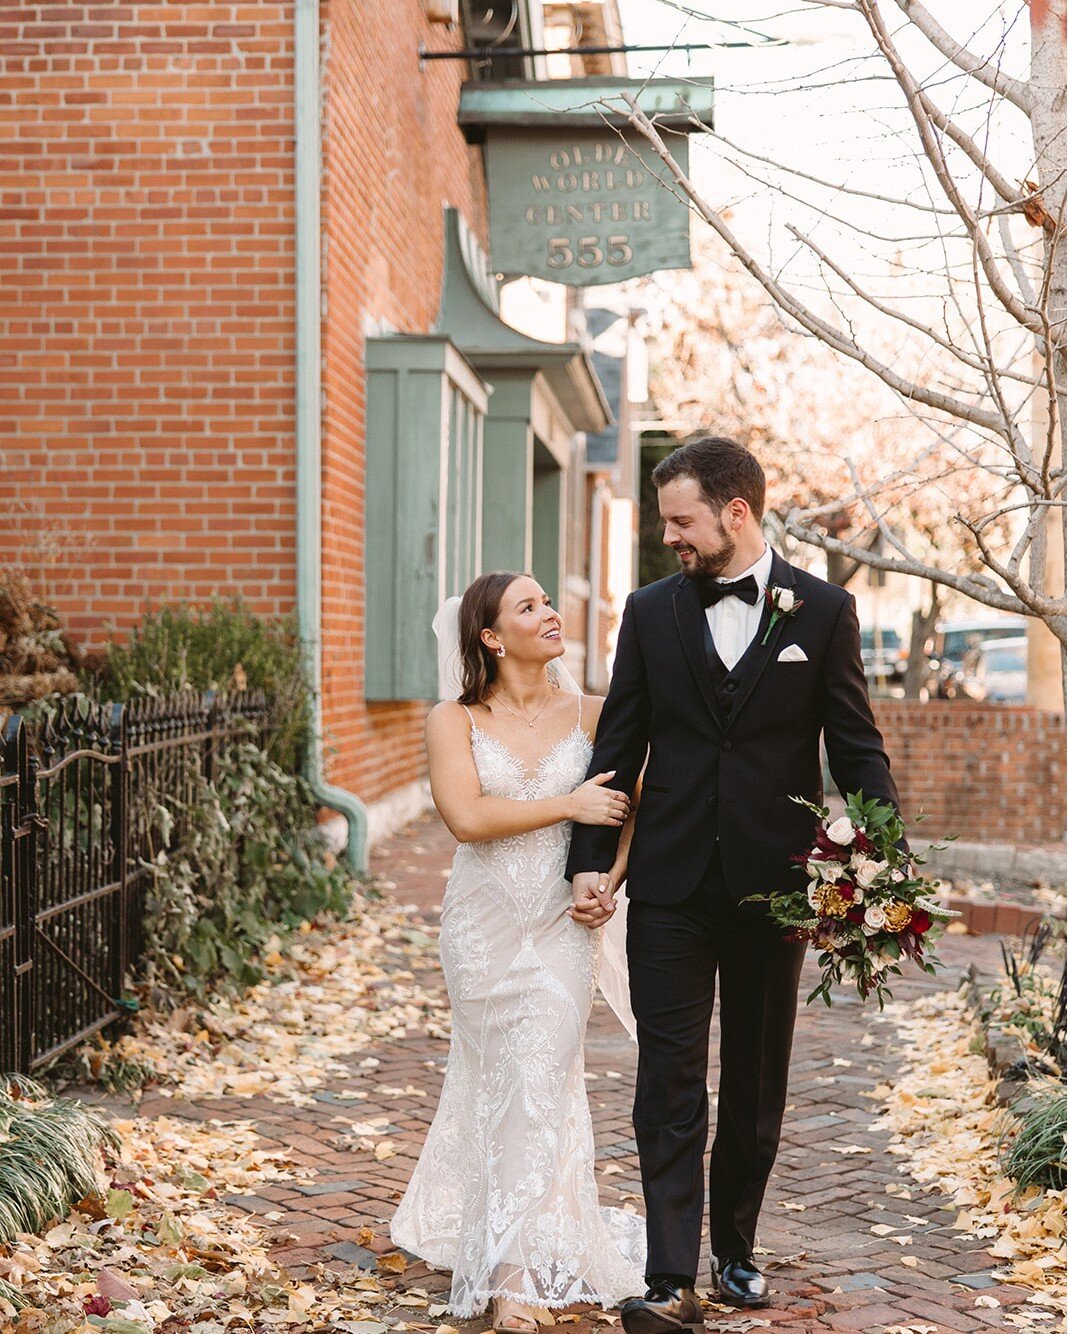 We love that Brewery District charm 🖤🖤🖤 Cobbled streets &amp; gorgeous homes surround our historic venue and we can't get enough of it. 😍

Photography: @brookmadephotography 

Image descriptions:
Image one: A bride and groom walk together on a co